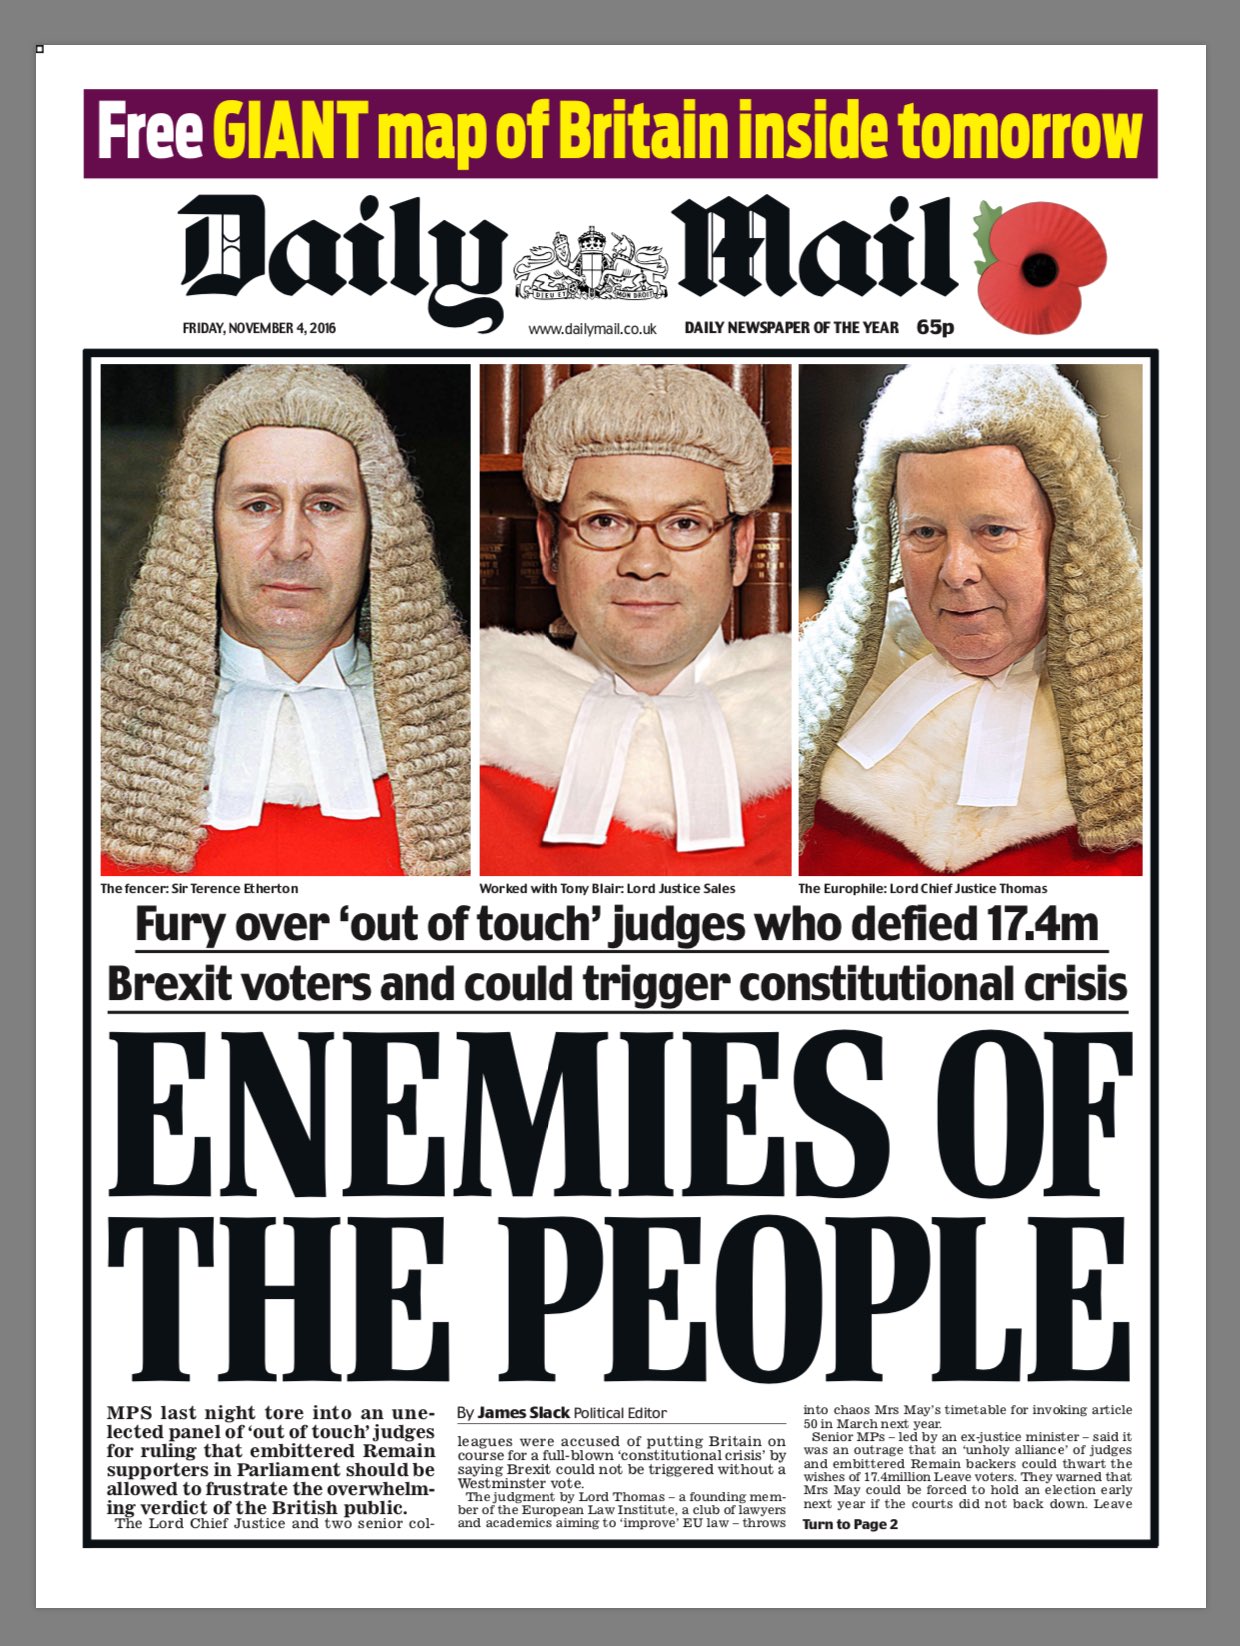 Daily Mail front page after brexit ruling